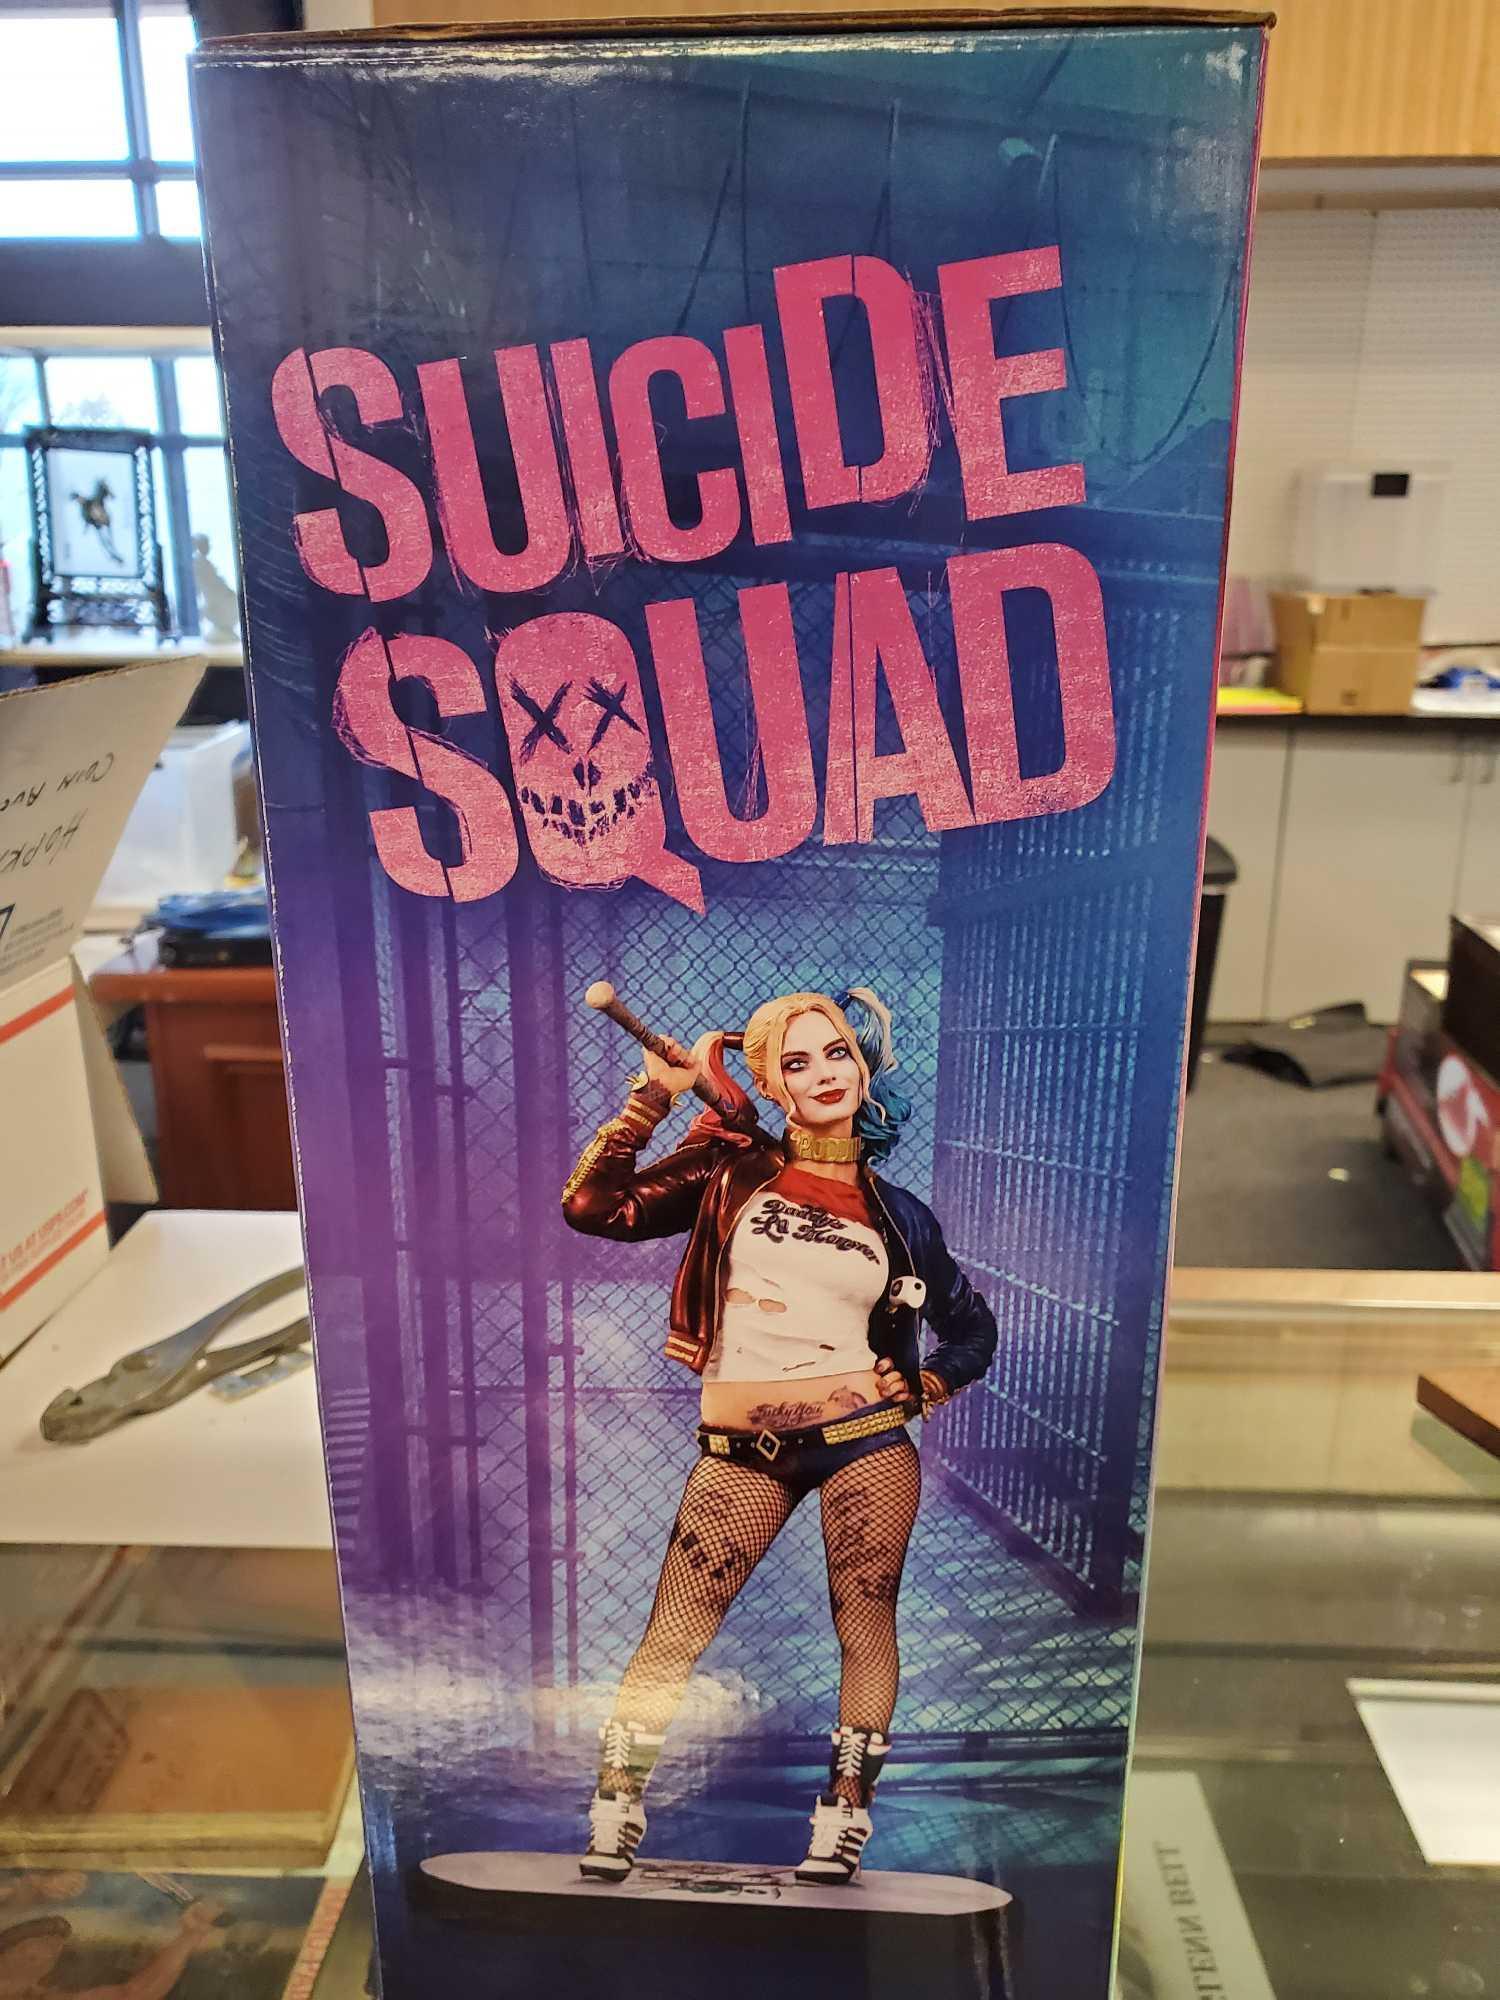 SUICIDE SQUAD HARLEY QUINN FIGURINE 12"h, COMES WITH BLUERAY, PLEASE SEE THE PICTURES FOR MORE